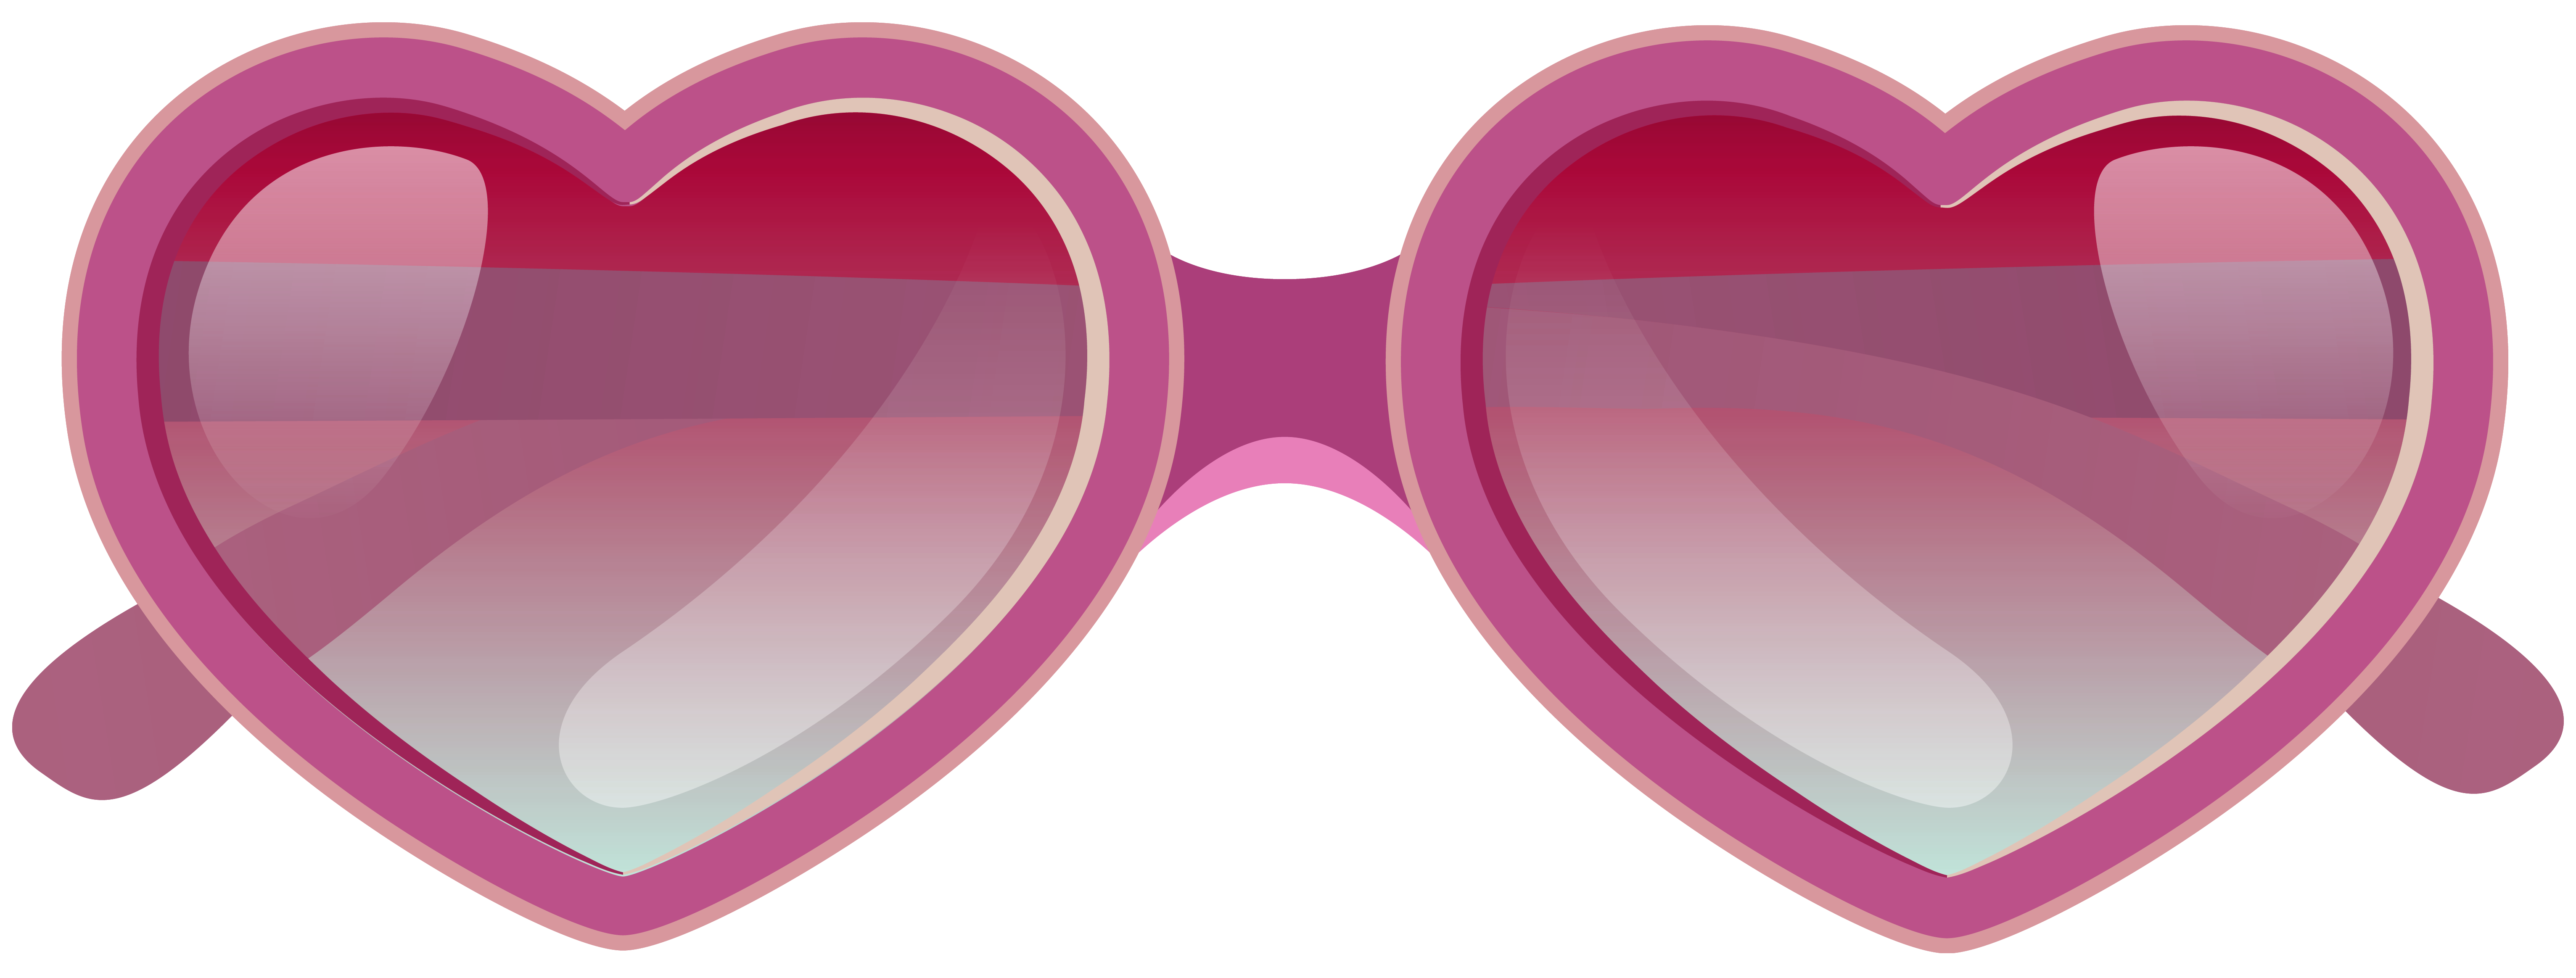 Pink Heart Sunglasses PNG Clipart Image